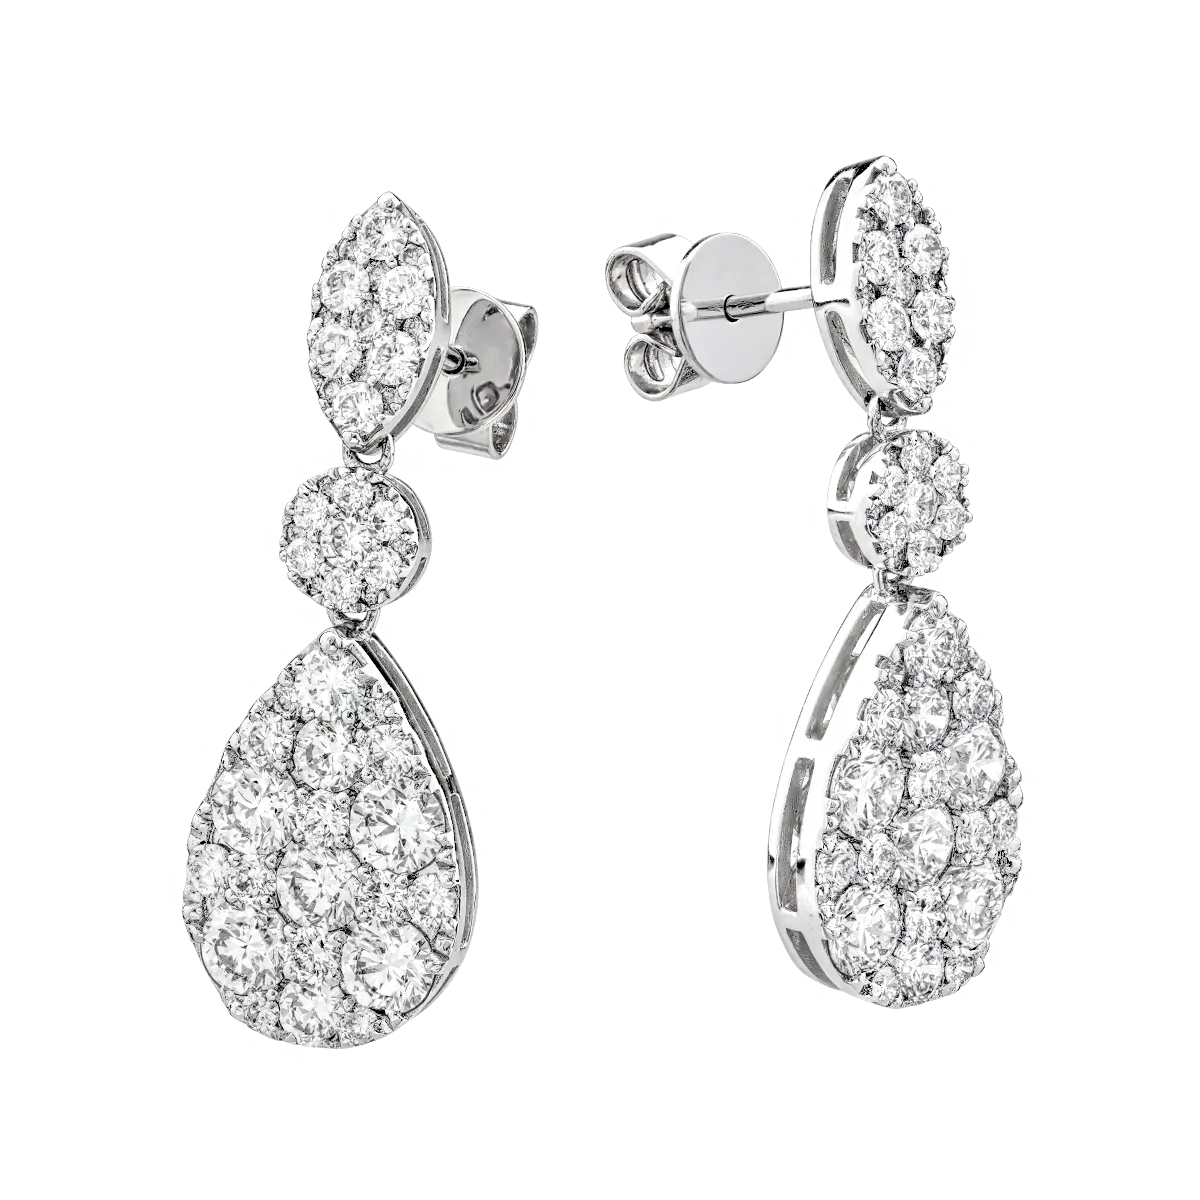 18K white gold earrings with 3.35ct diamonds